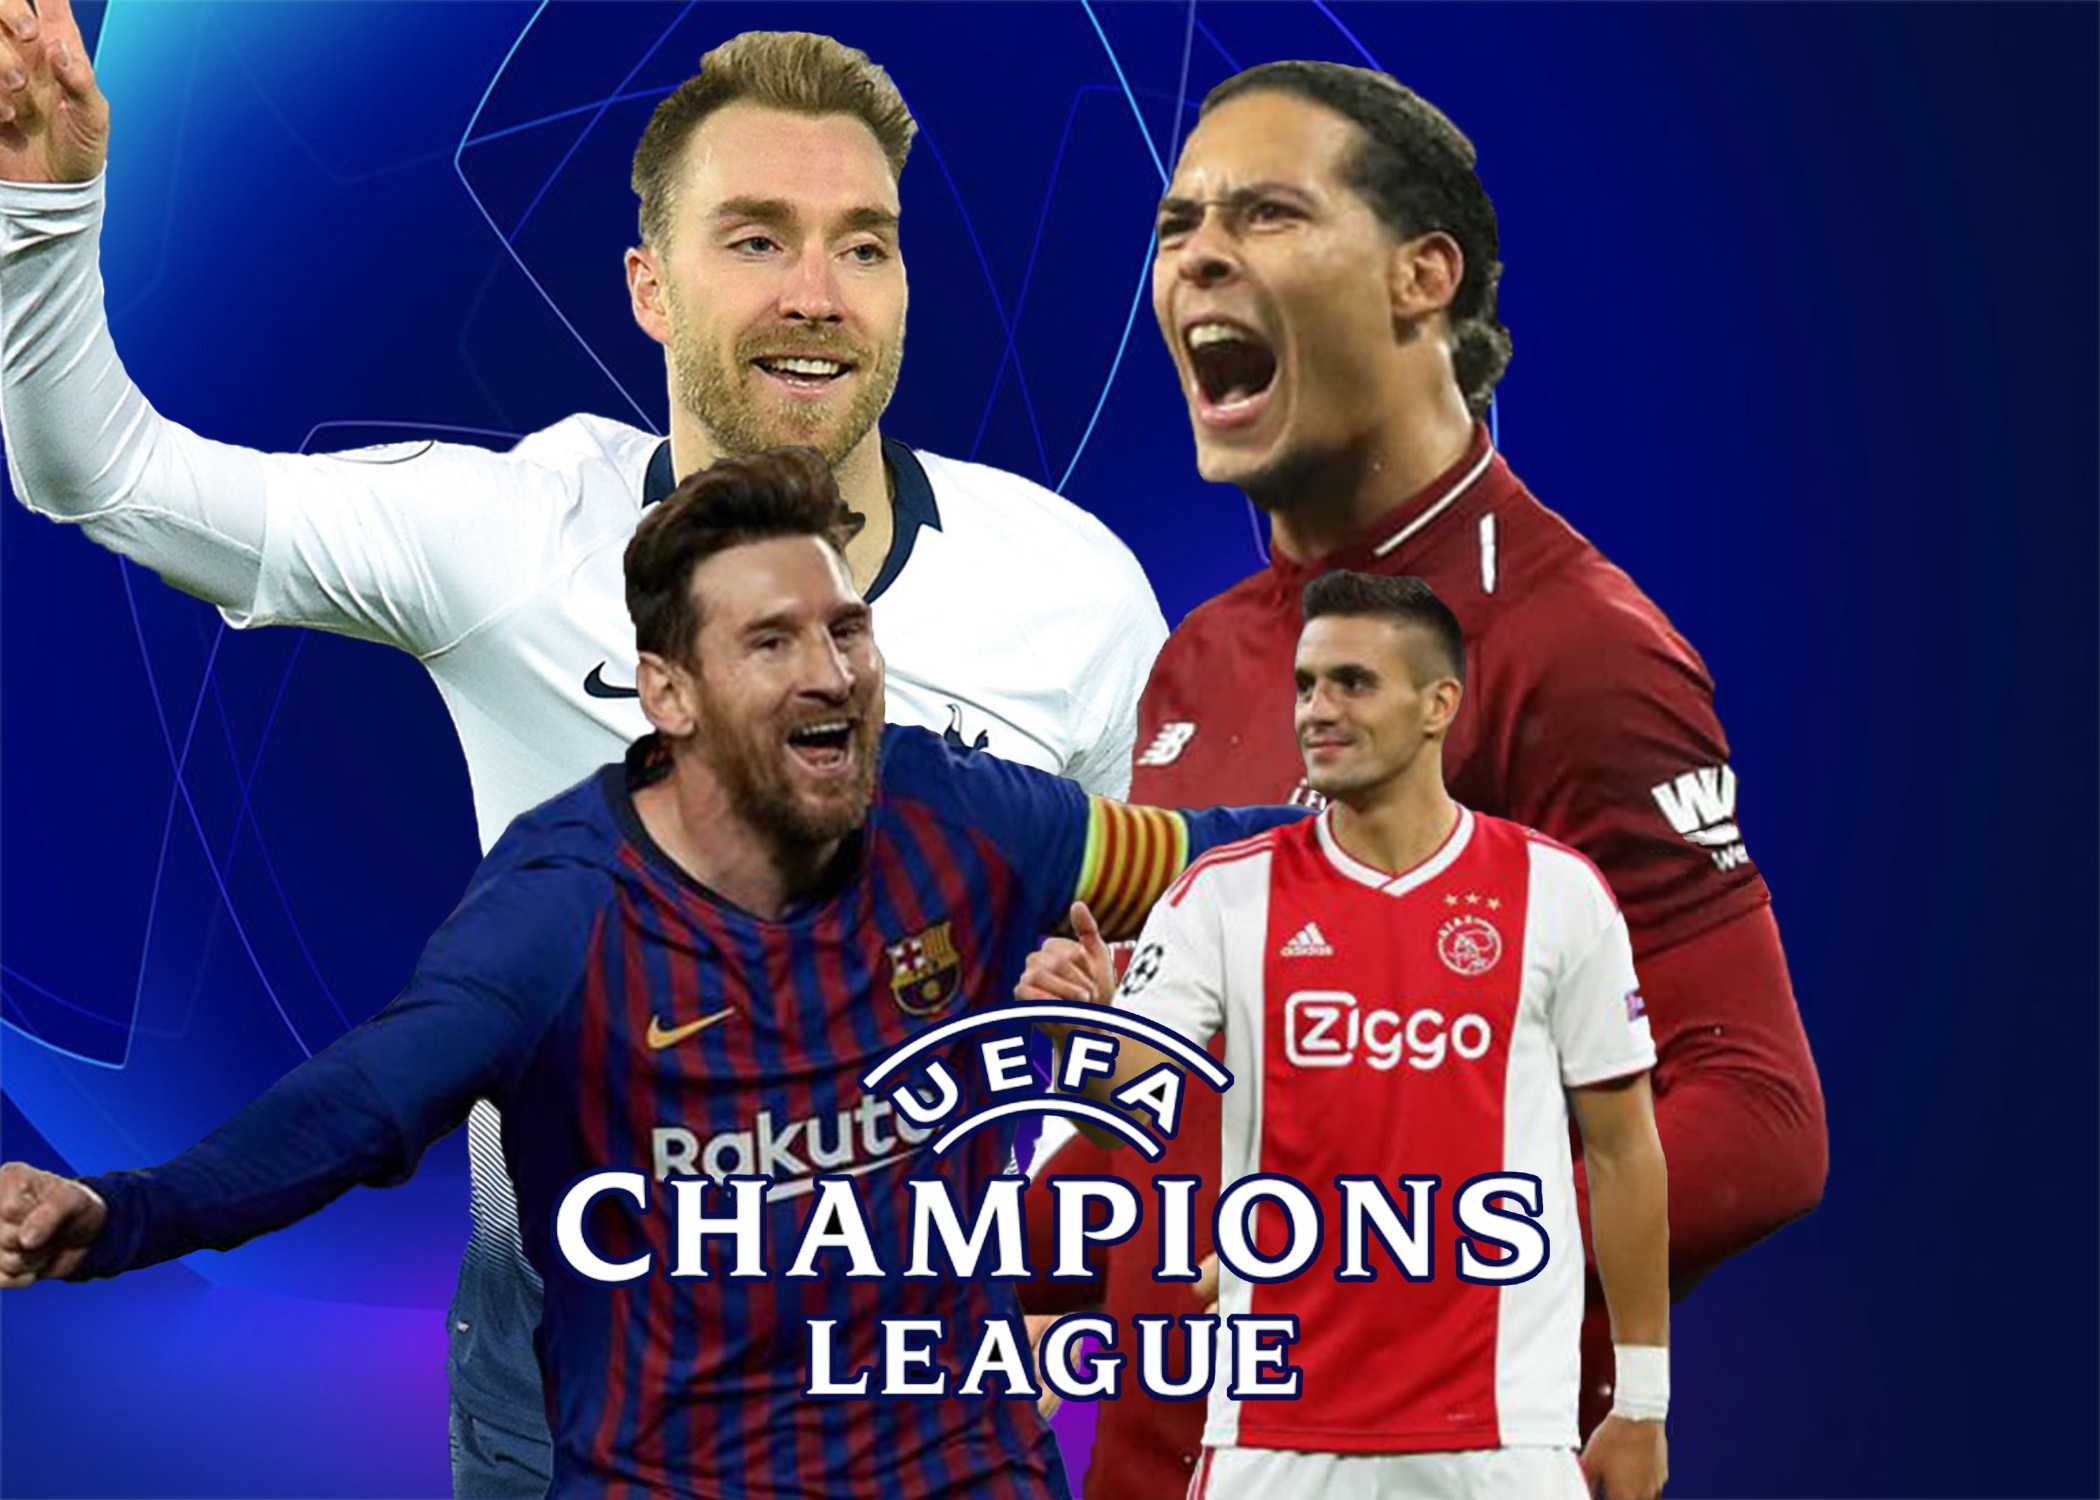 Champions League: Race For The Title Intensifies